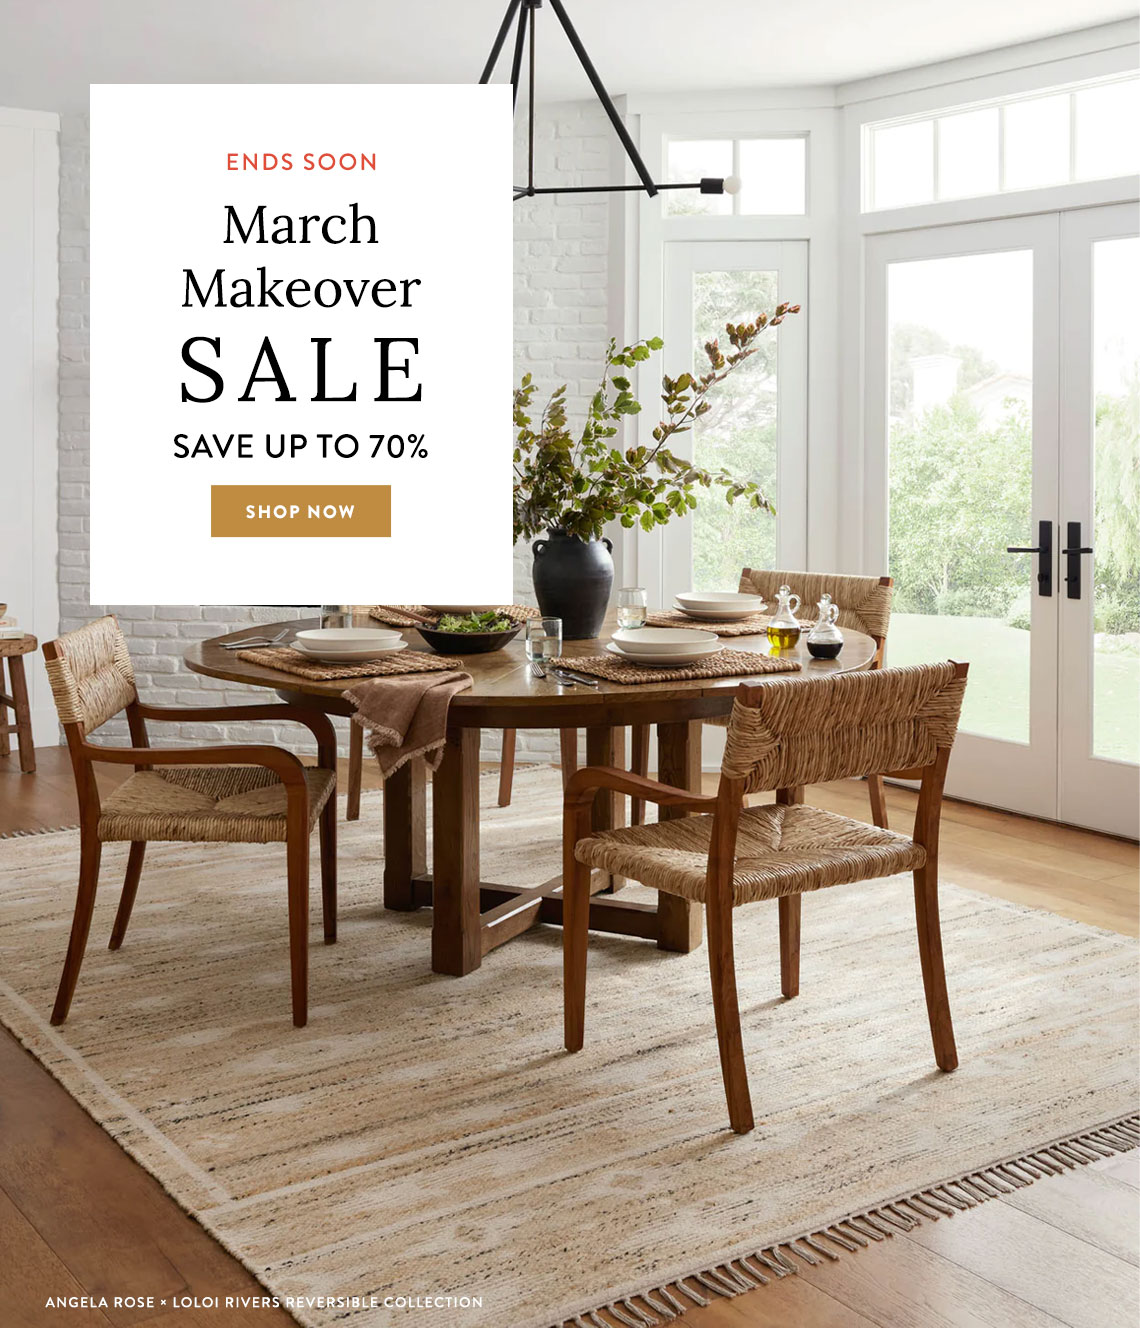 March Makeover Sale  - Ends Soon